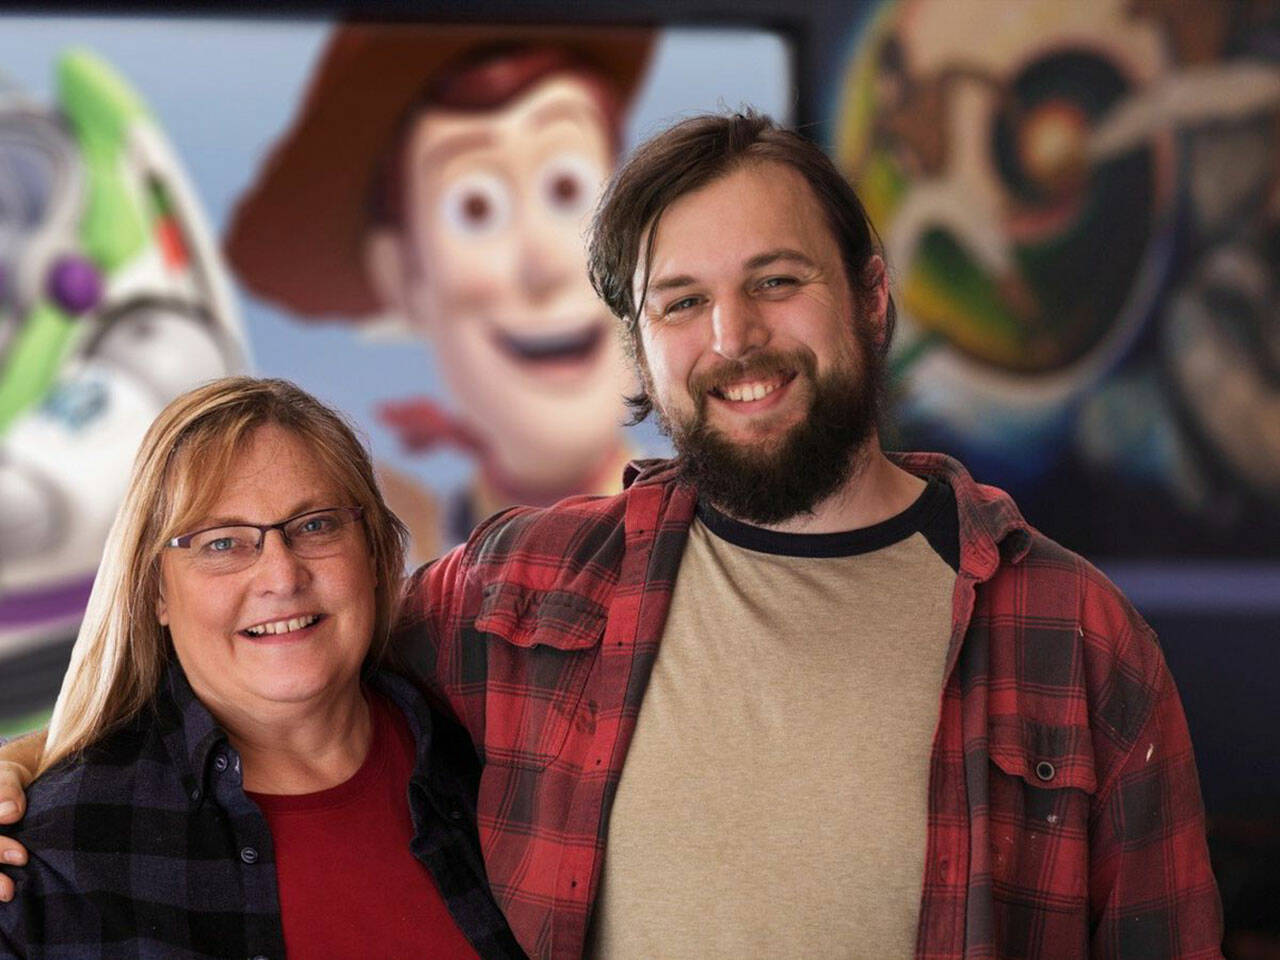 (Todd Pearson Photo) Eileen Wolcott, the matriarch of a single-screen cinema family, with her hardworking son, Jake Wolcott.